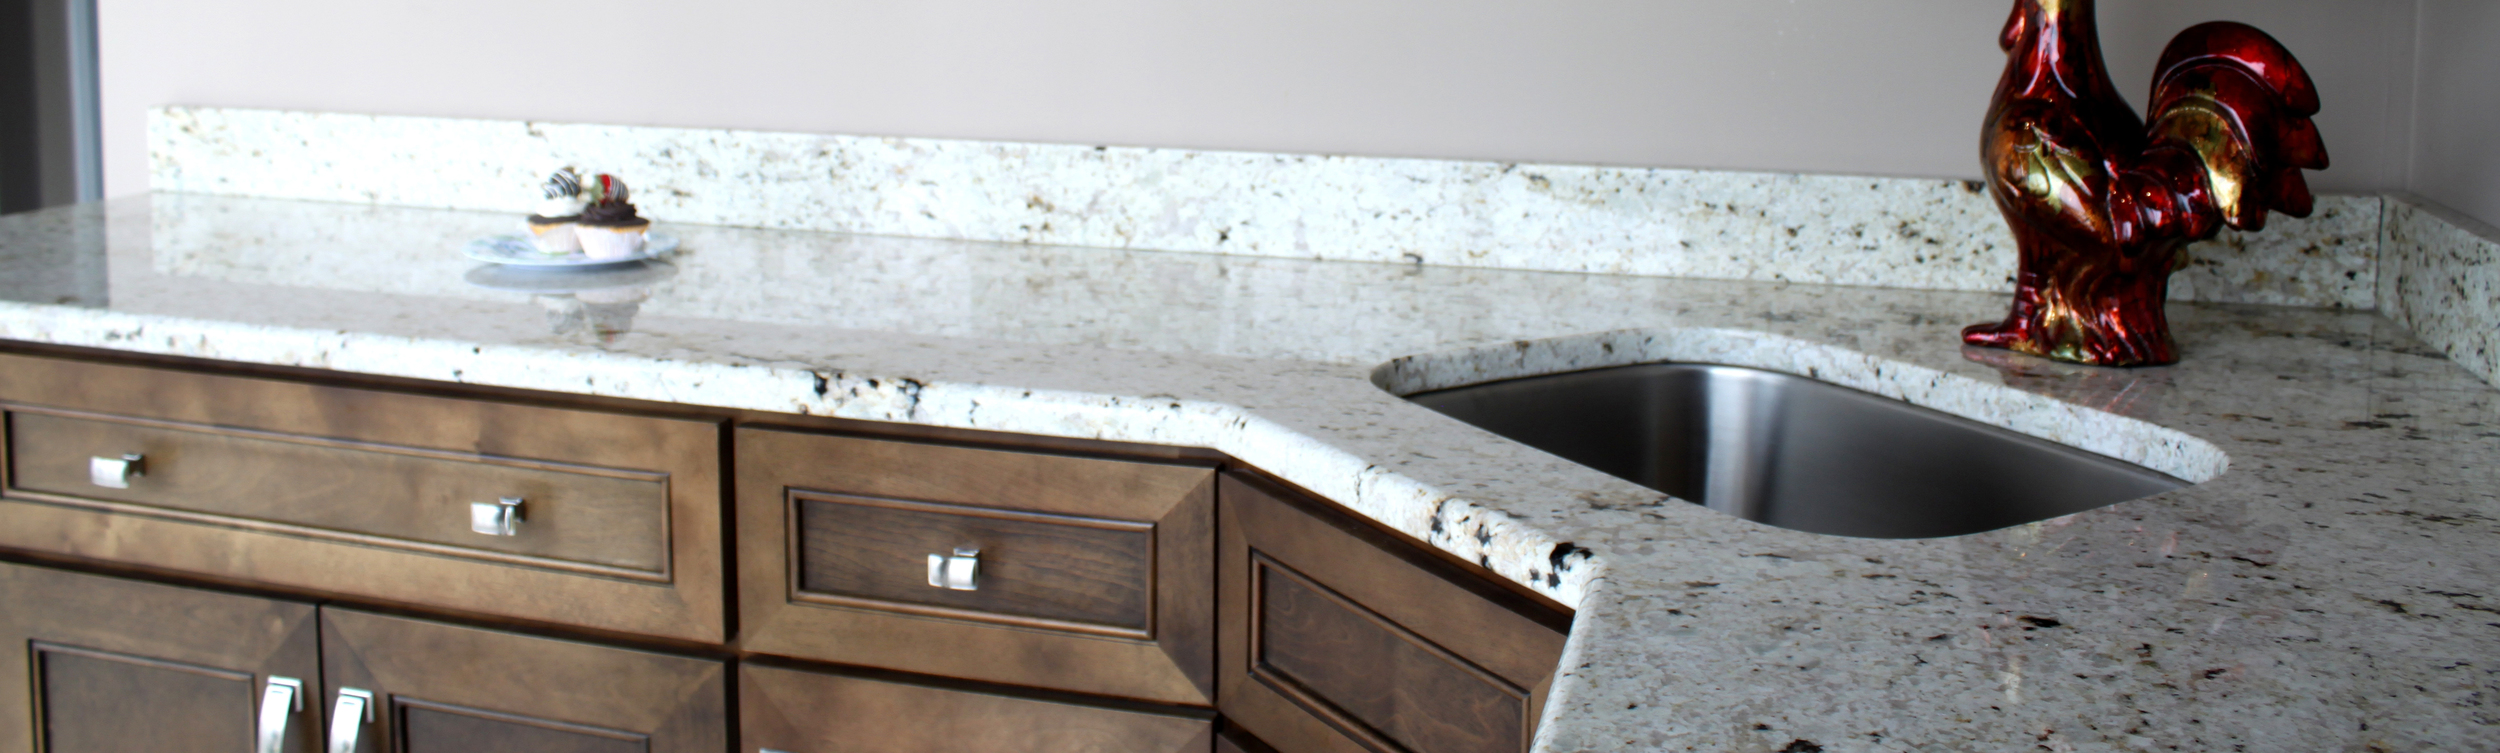 South Elgin Kitchen Cabinets Sinks And Countertops Rock Counter